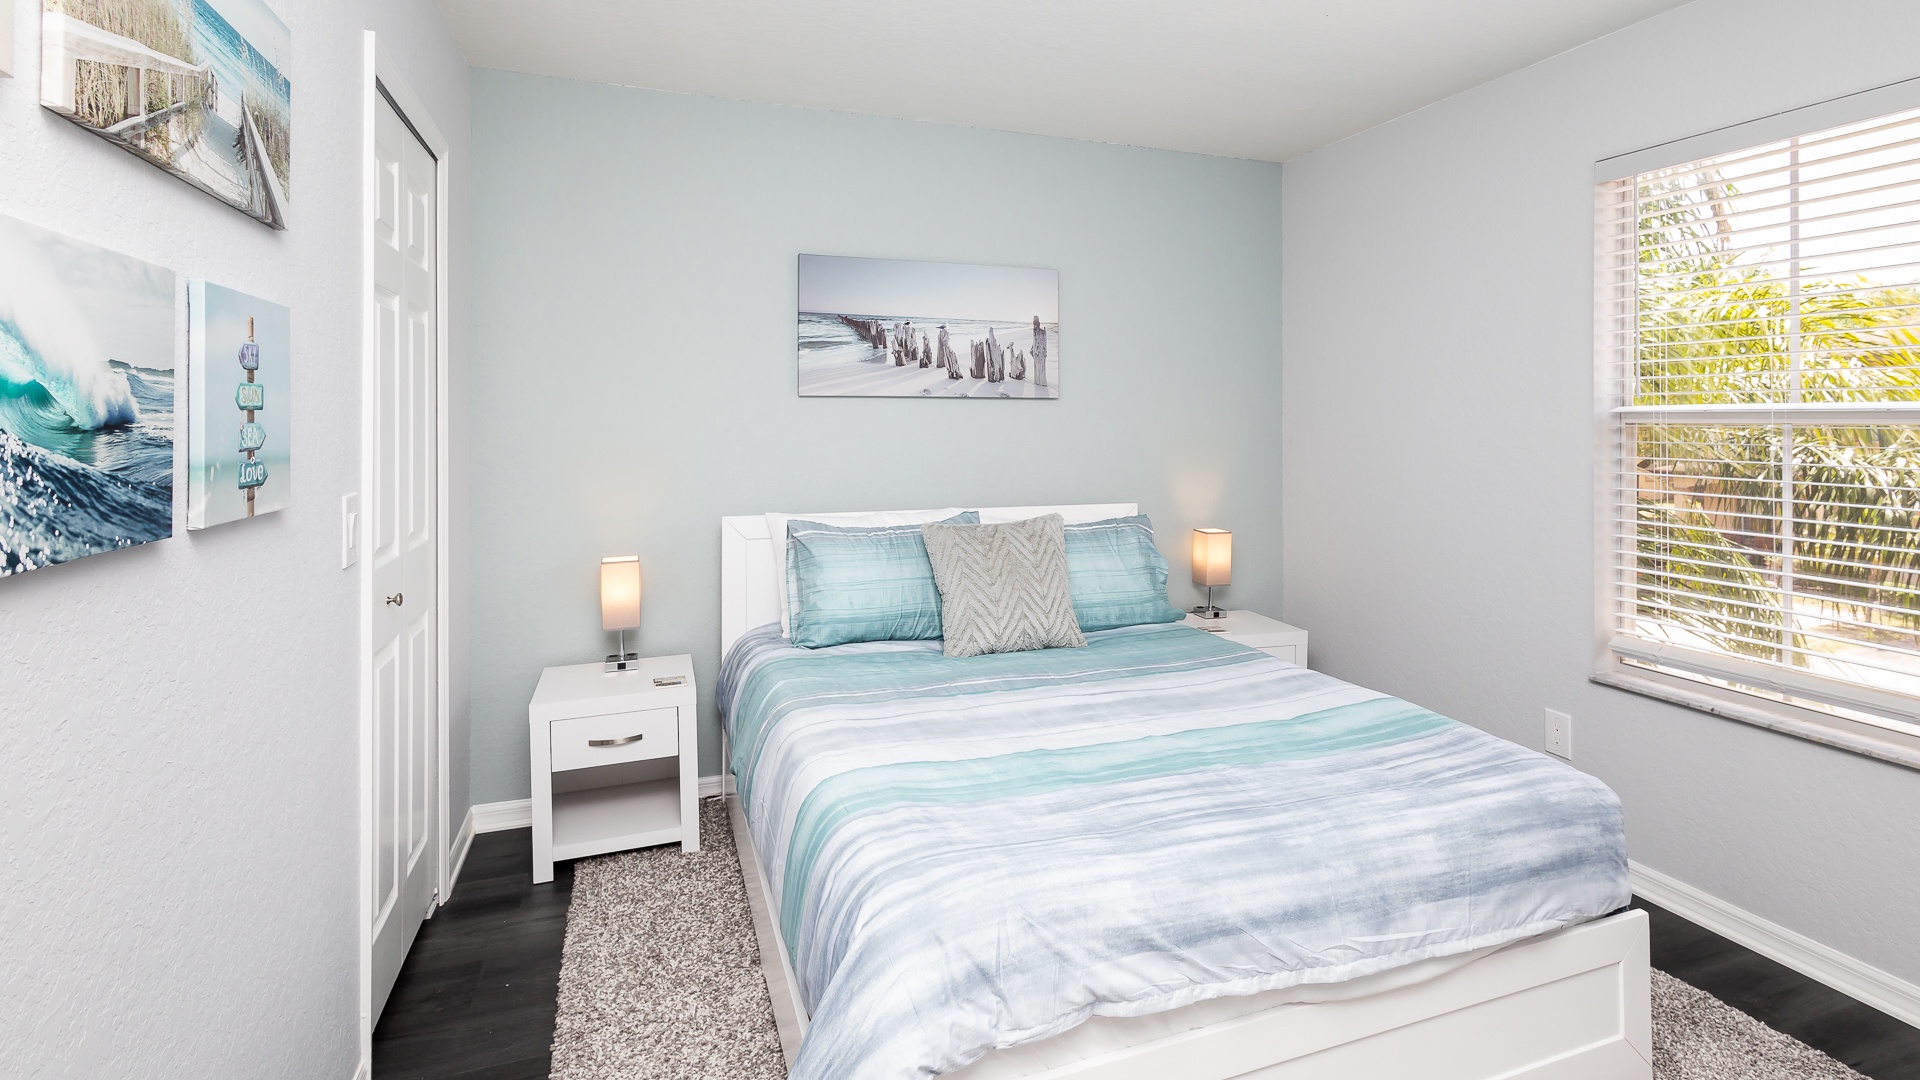 A plush queen-sized bed & Smart TV await in this 2nd floor bedroom sanctuary